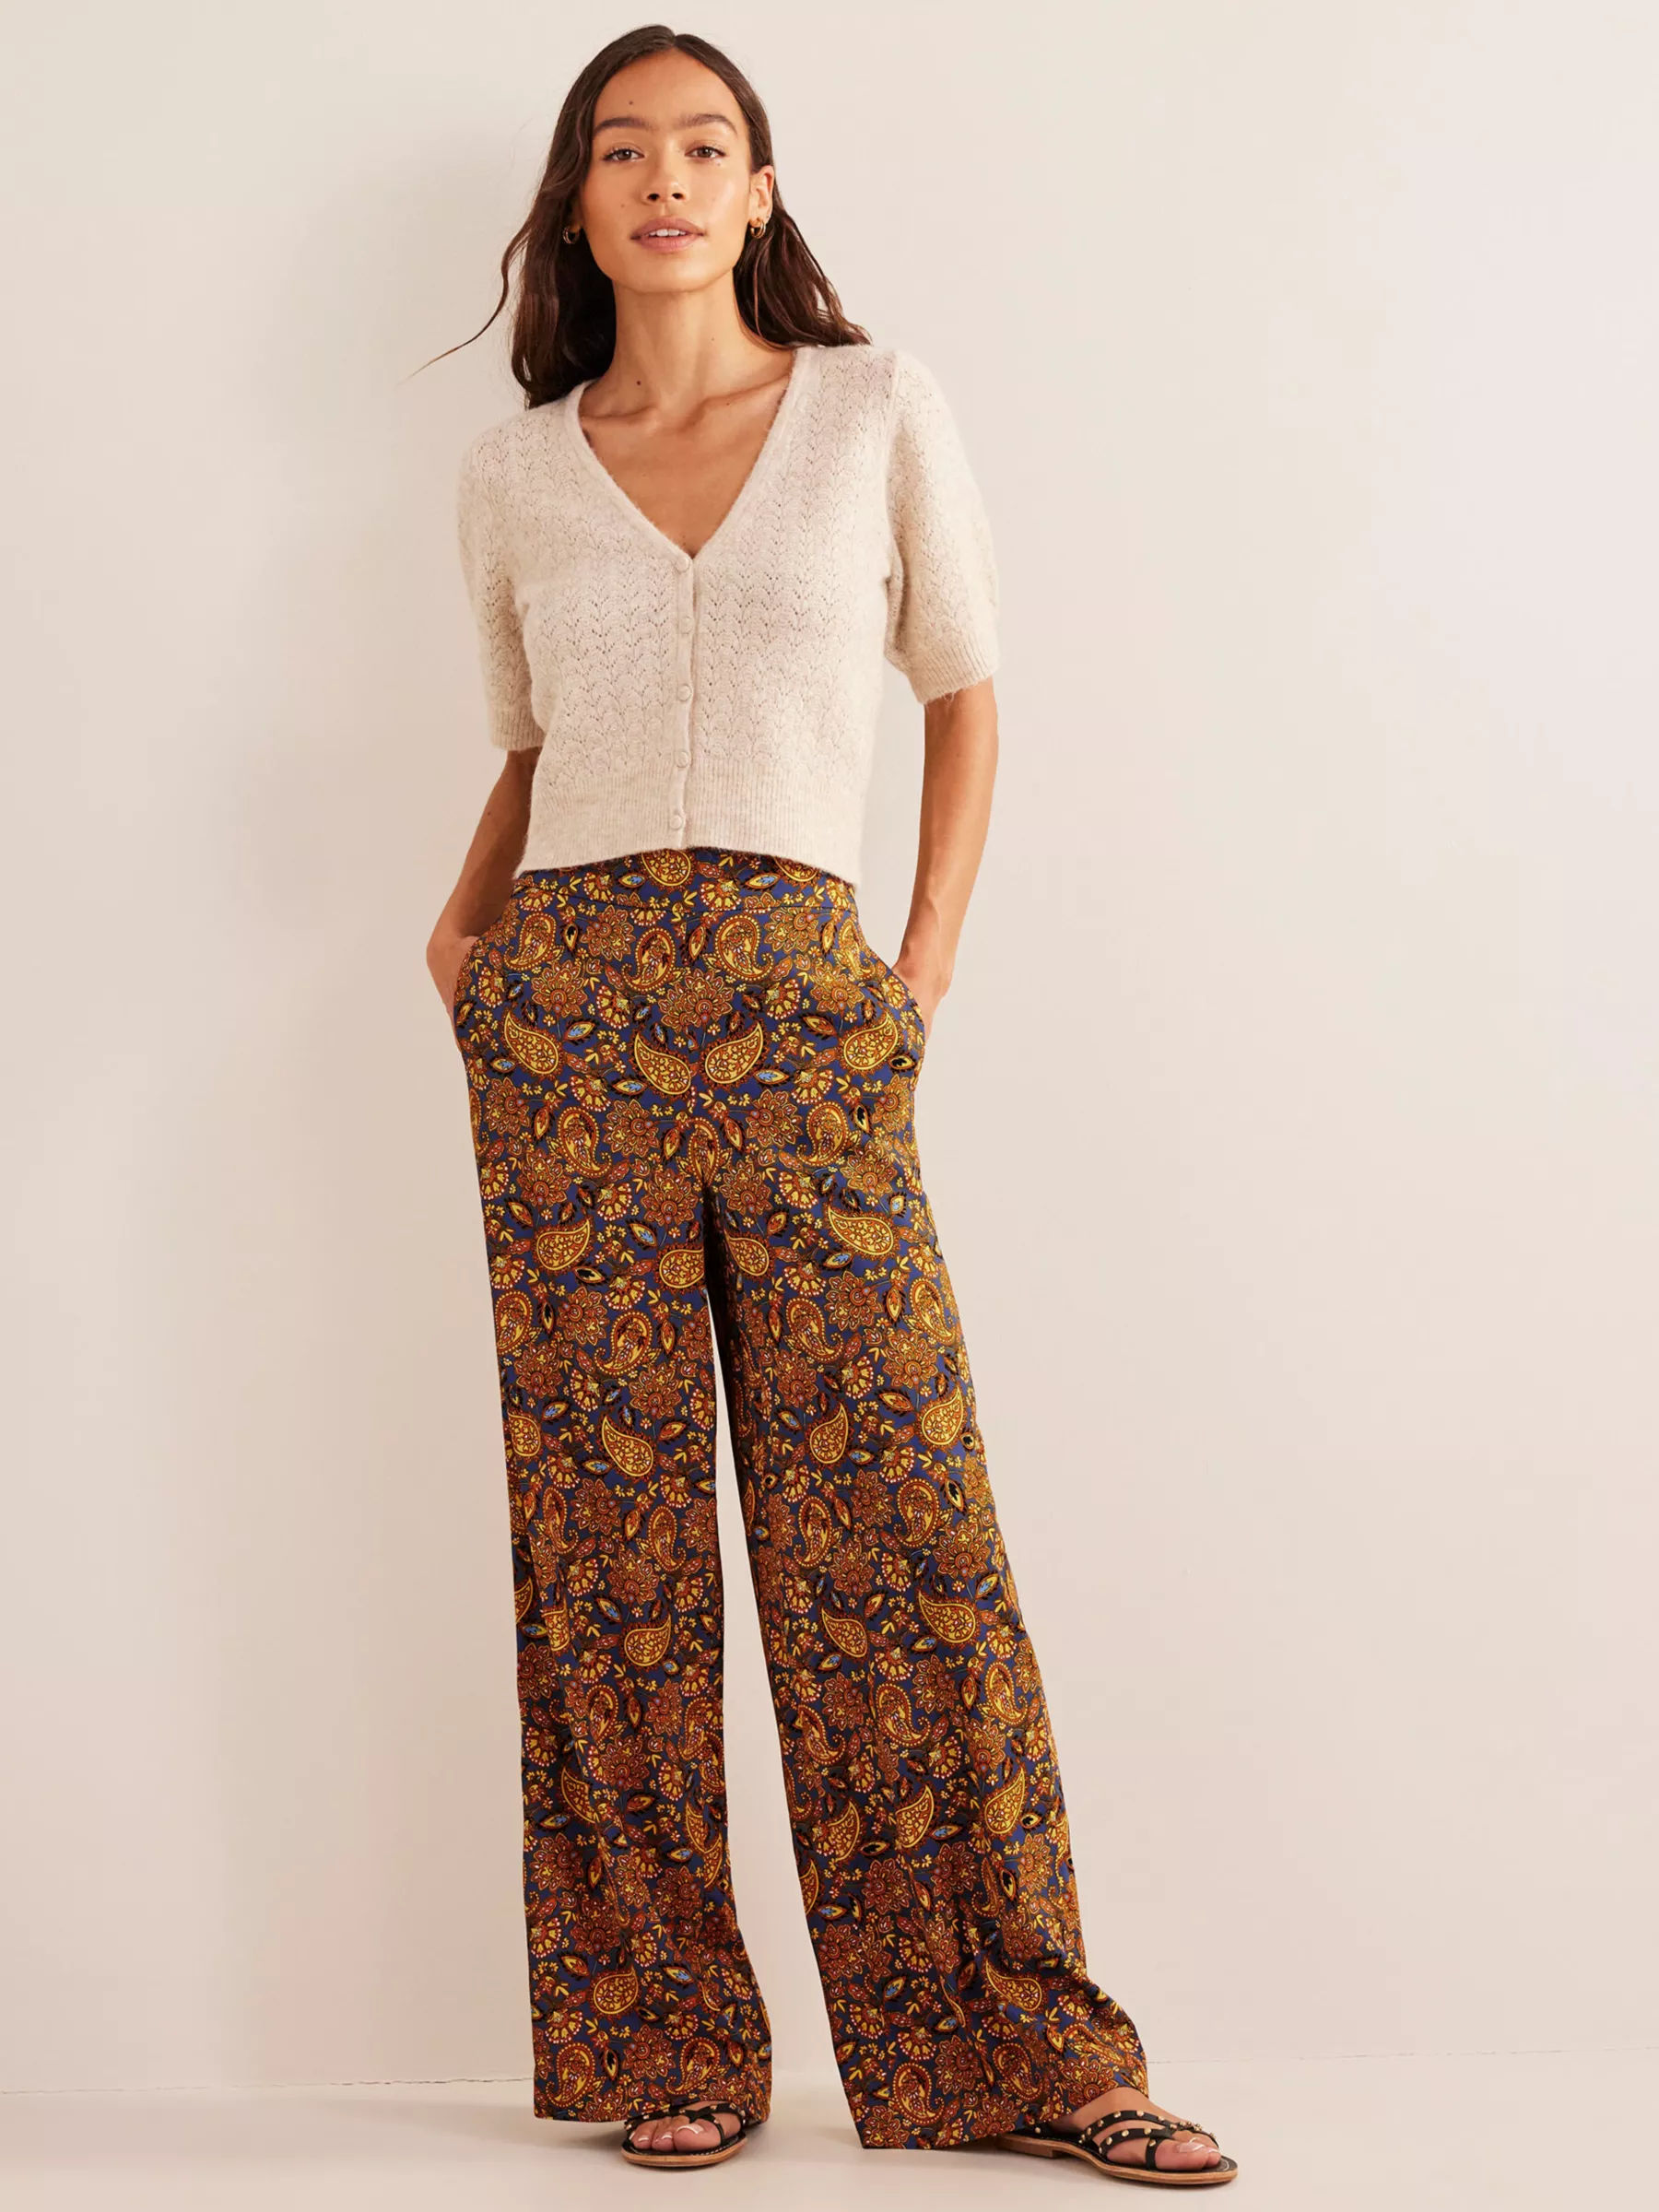 Kew Wool Trousers - Camel and Pink Prince of Wales | Boden UK